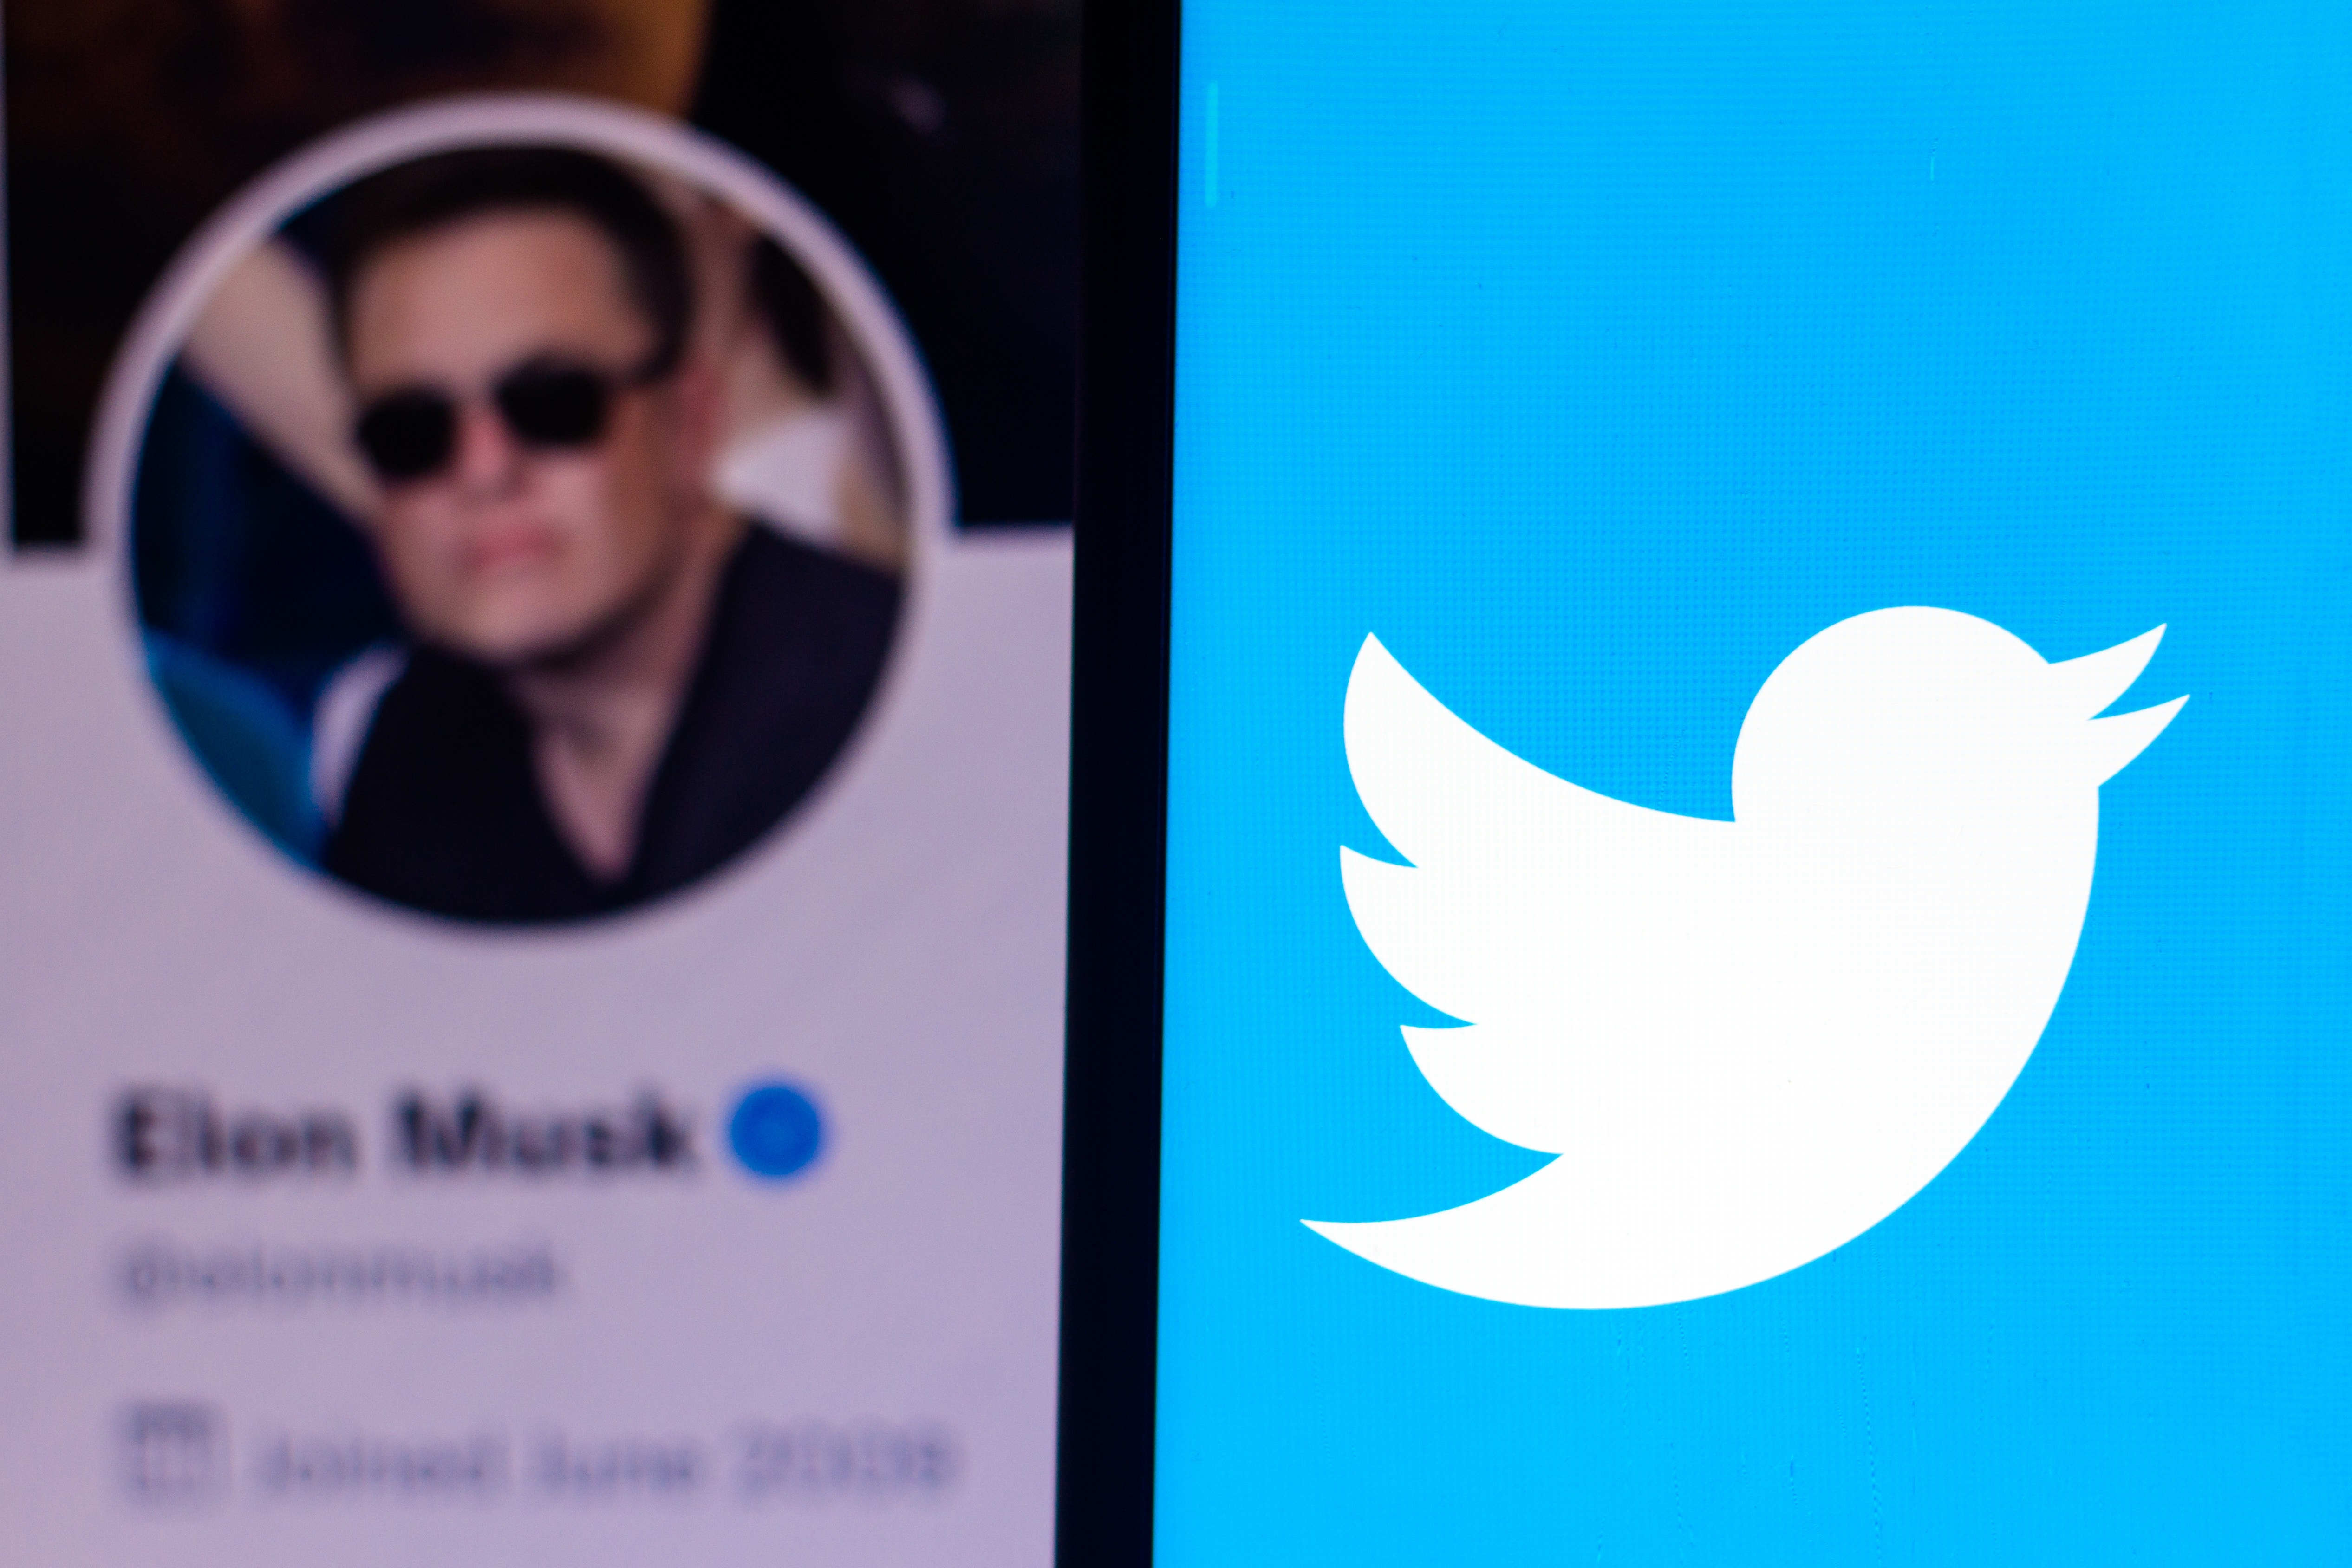 Twitter Sues Elon Musk To Force Buyout: How Chuck Norris Memes, Poop Emojis, Texts Play A Role